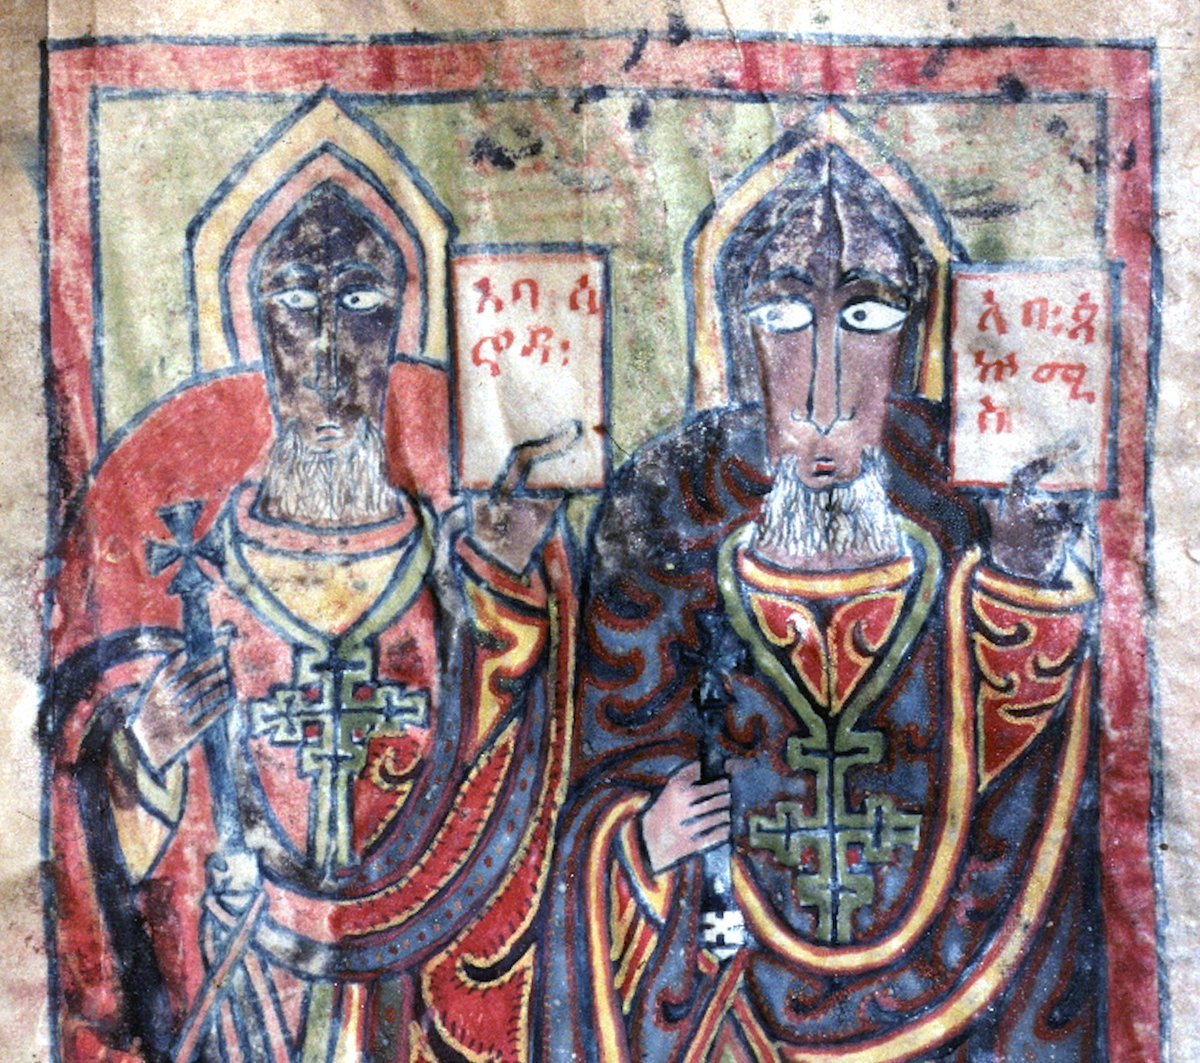 Egyptian fathers: St Shenoute (አባ፡ ሳኖዳ፡) and St Pachomius (አባ፡ ጳኵሚስ፡) (Ethiopia, 15th c.)   #egypt #coptic #churchfathers #shenoute #pachomius #monk #monasticism #africanart